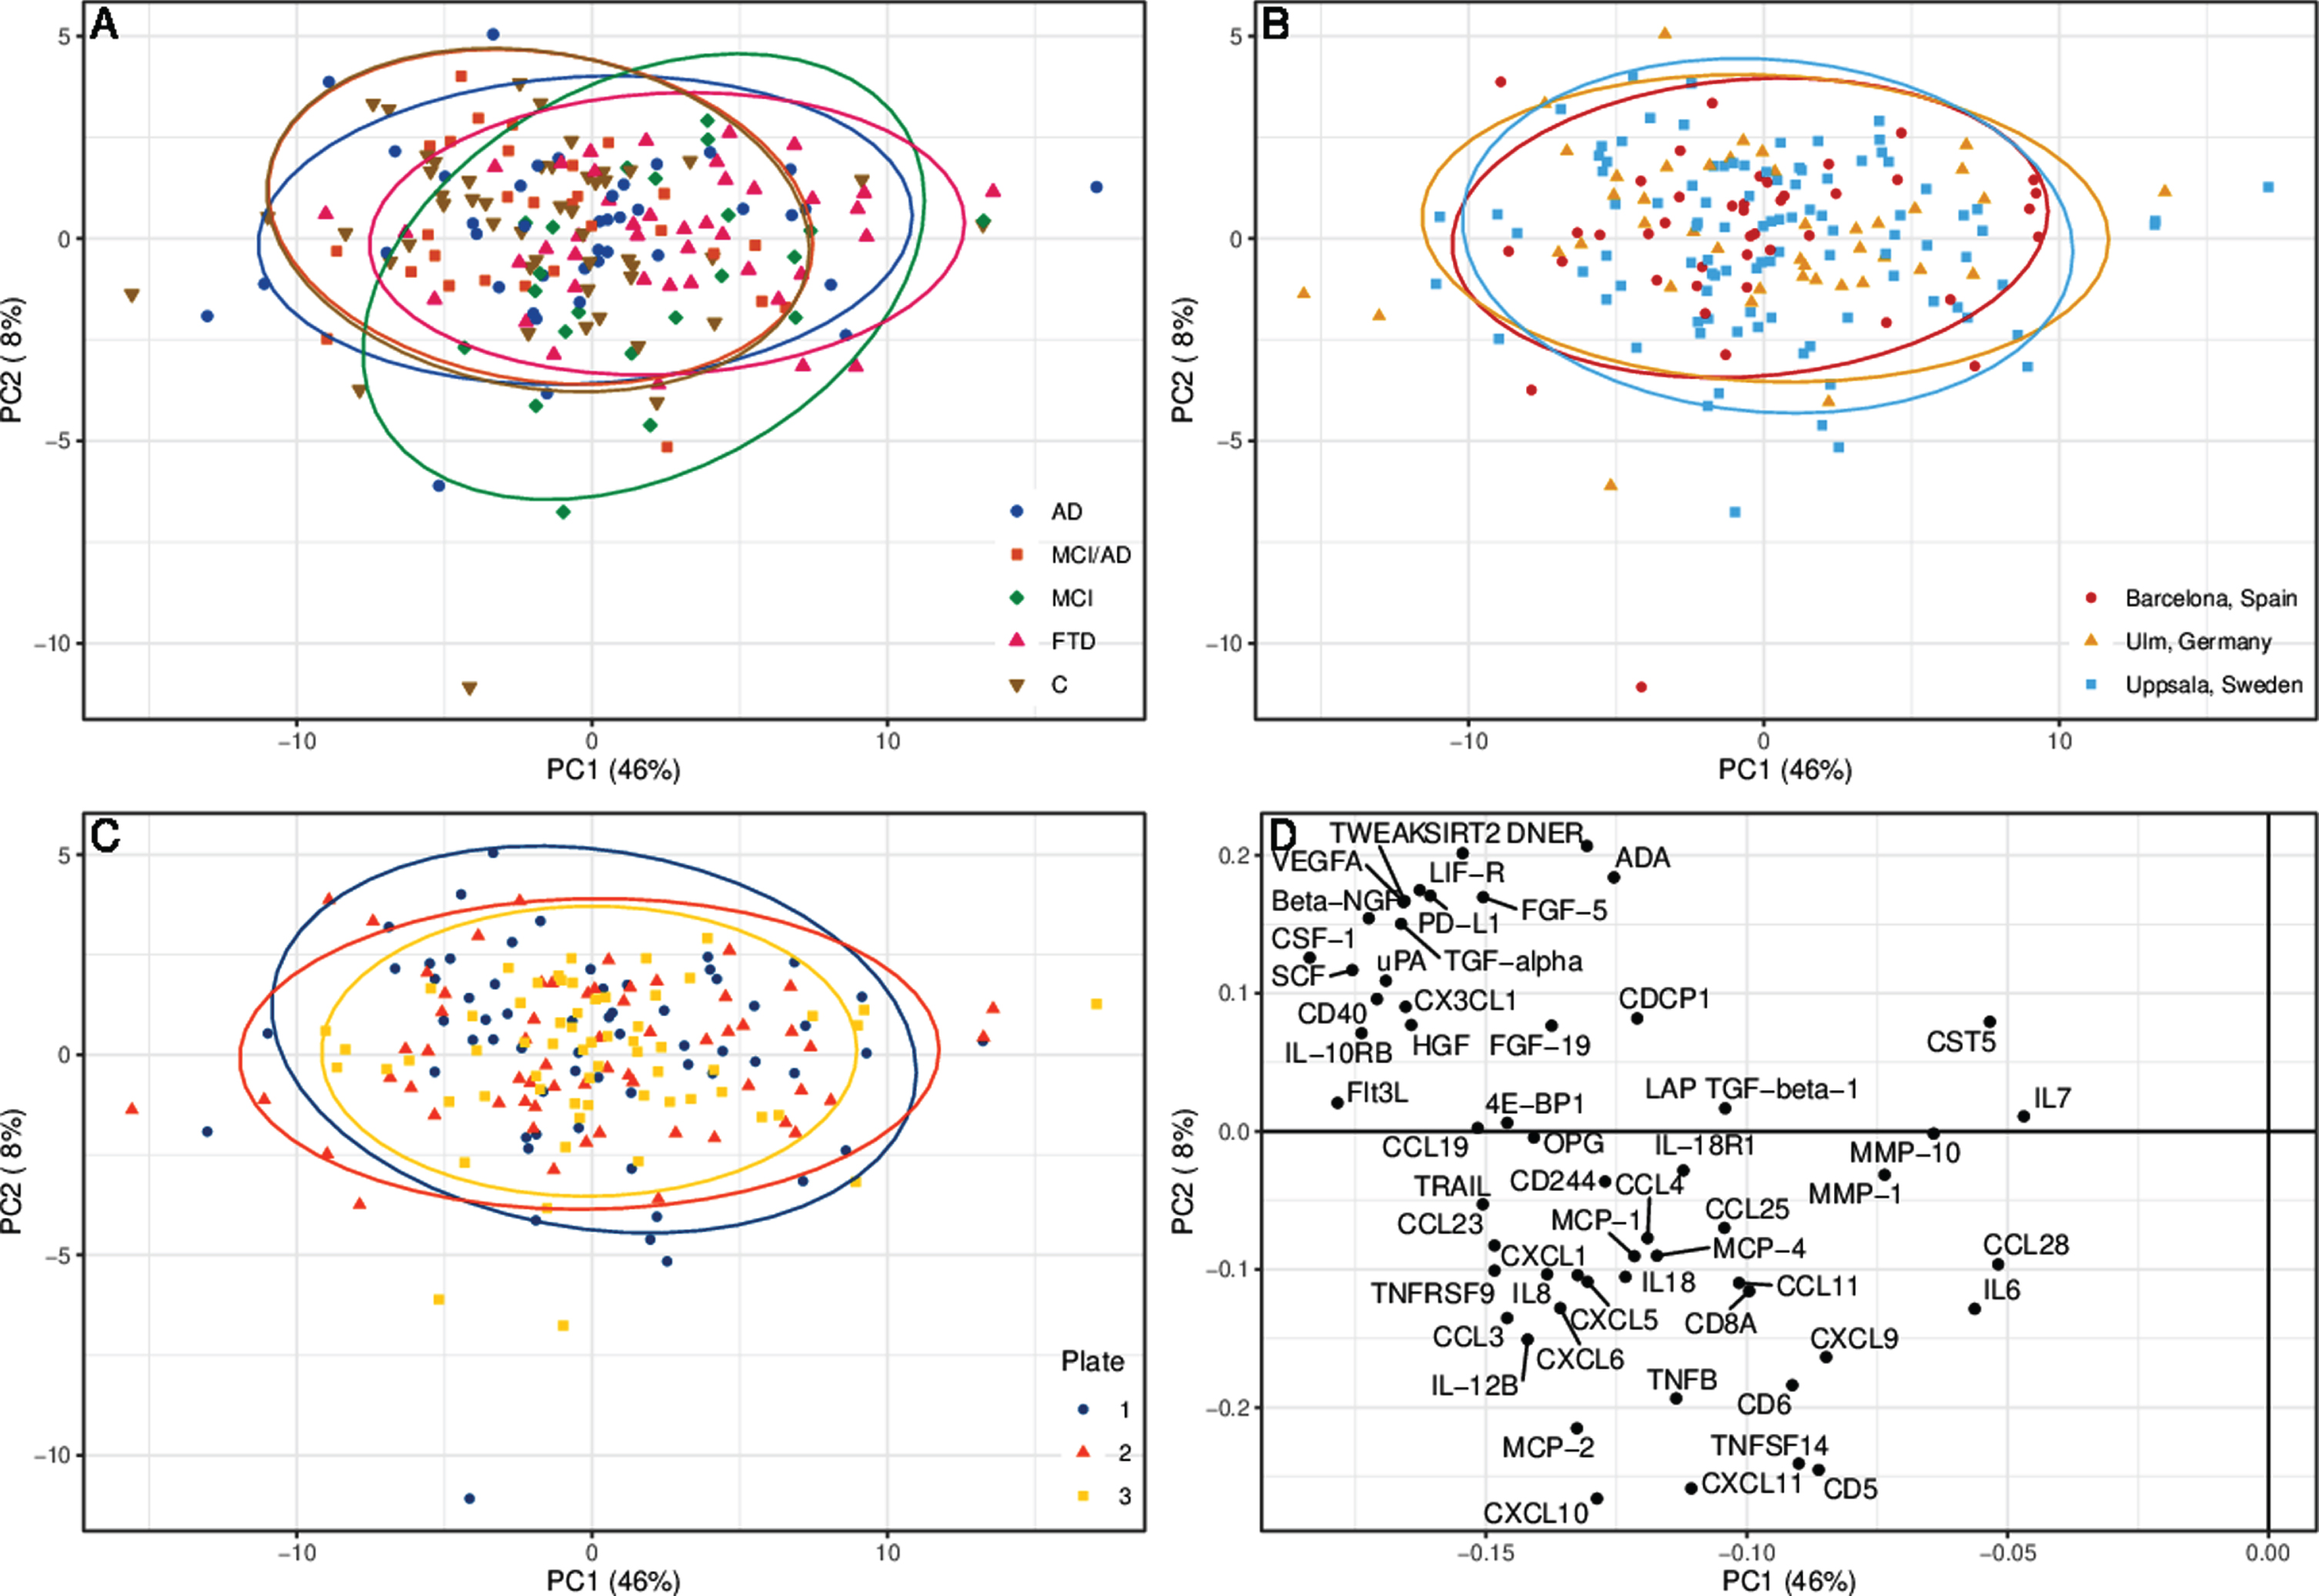 Principal component analysis (PCA) of cerebrospinal fluid protein levels. The PCA is divided into (A) patient groups, (B) medical centers, and (C) number of plate sent for analysis. Each ellipse represents 95% of respective group’s samples. D) The detected proteins’ contribution to principal component 1 (PC1) and 2 (PC2). AD, Alzheimer’s disease dementia; C, healthy controls; FTD, frontotemporal dementia; MCI, mild cognitive impairment, cognitively stable at the MCI level; MCI/AD, mild cognitive impairment due to Alzheimer’s disease.